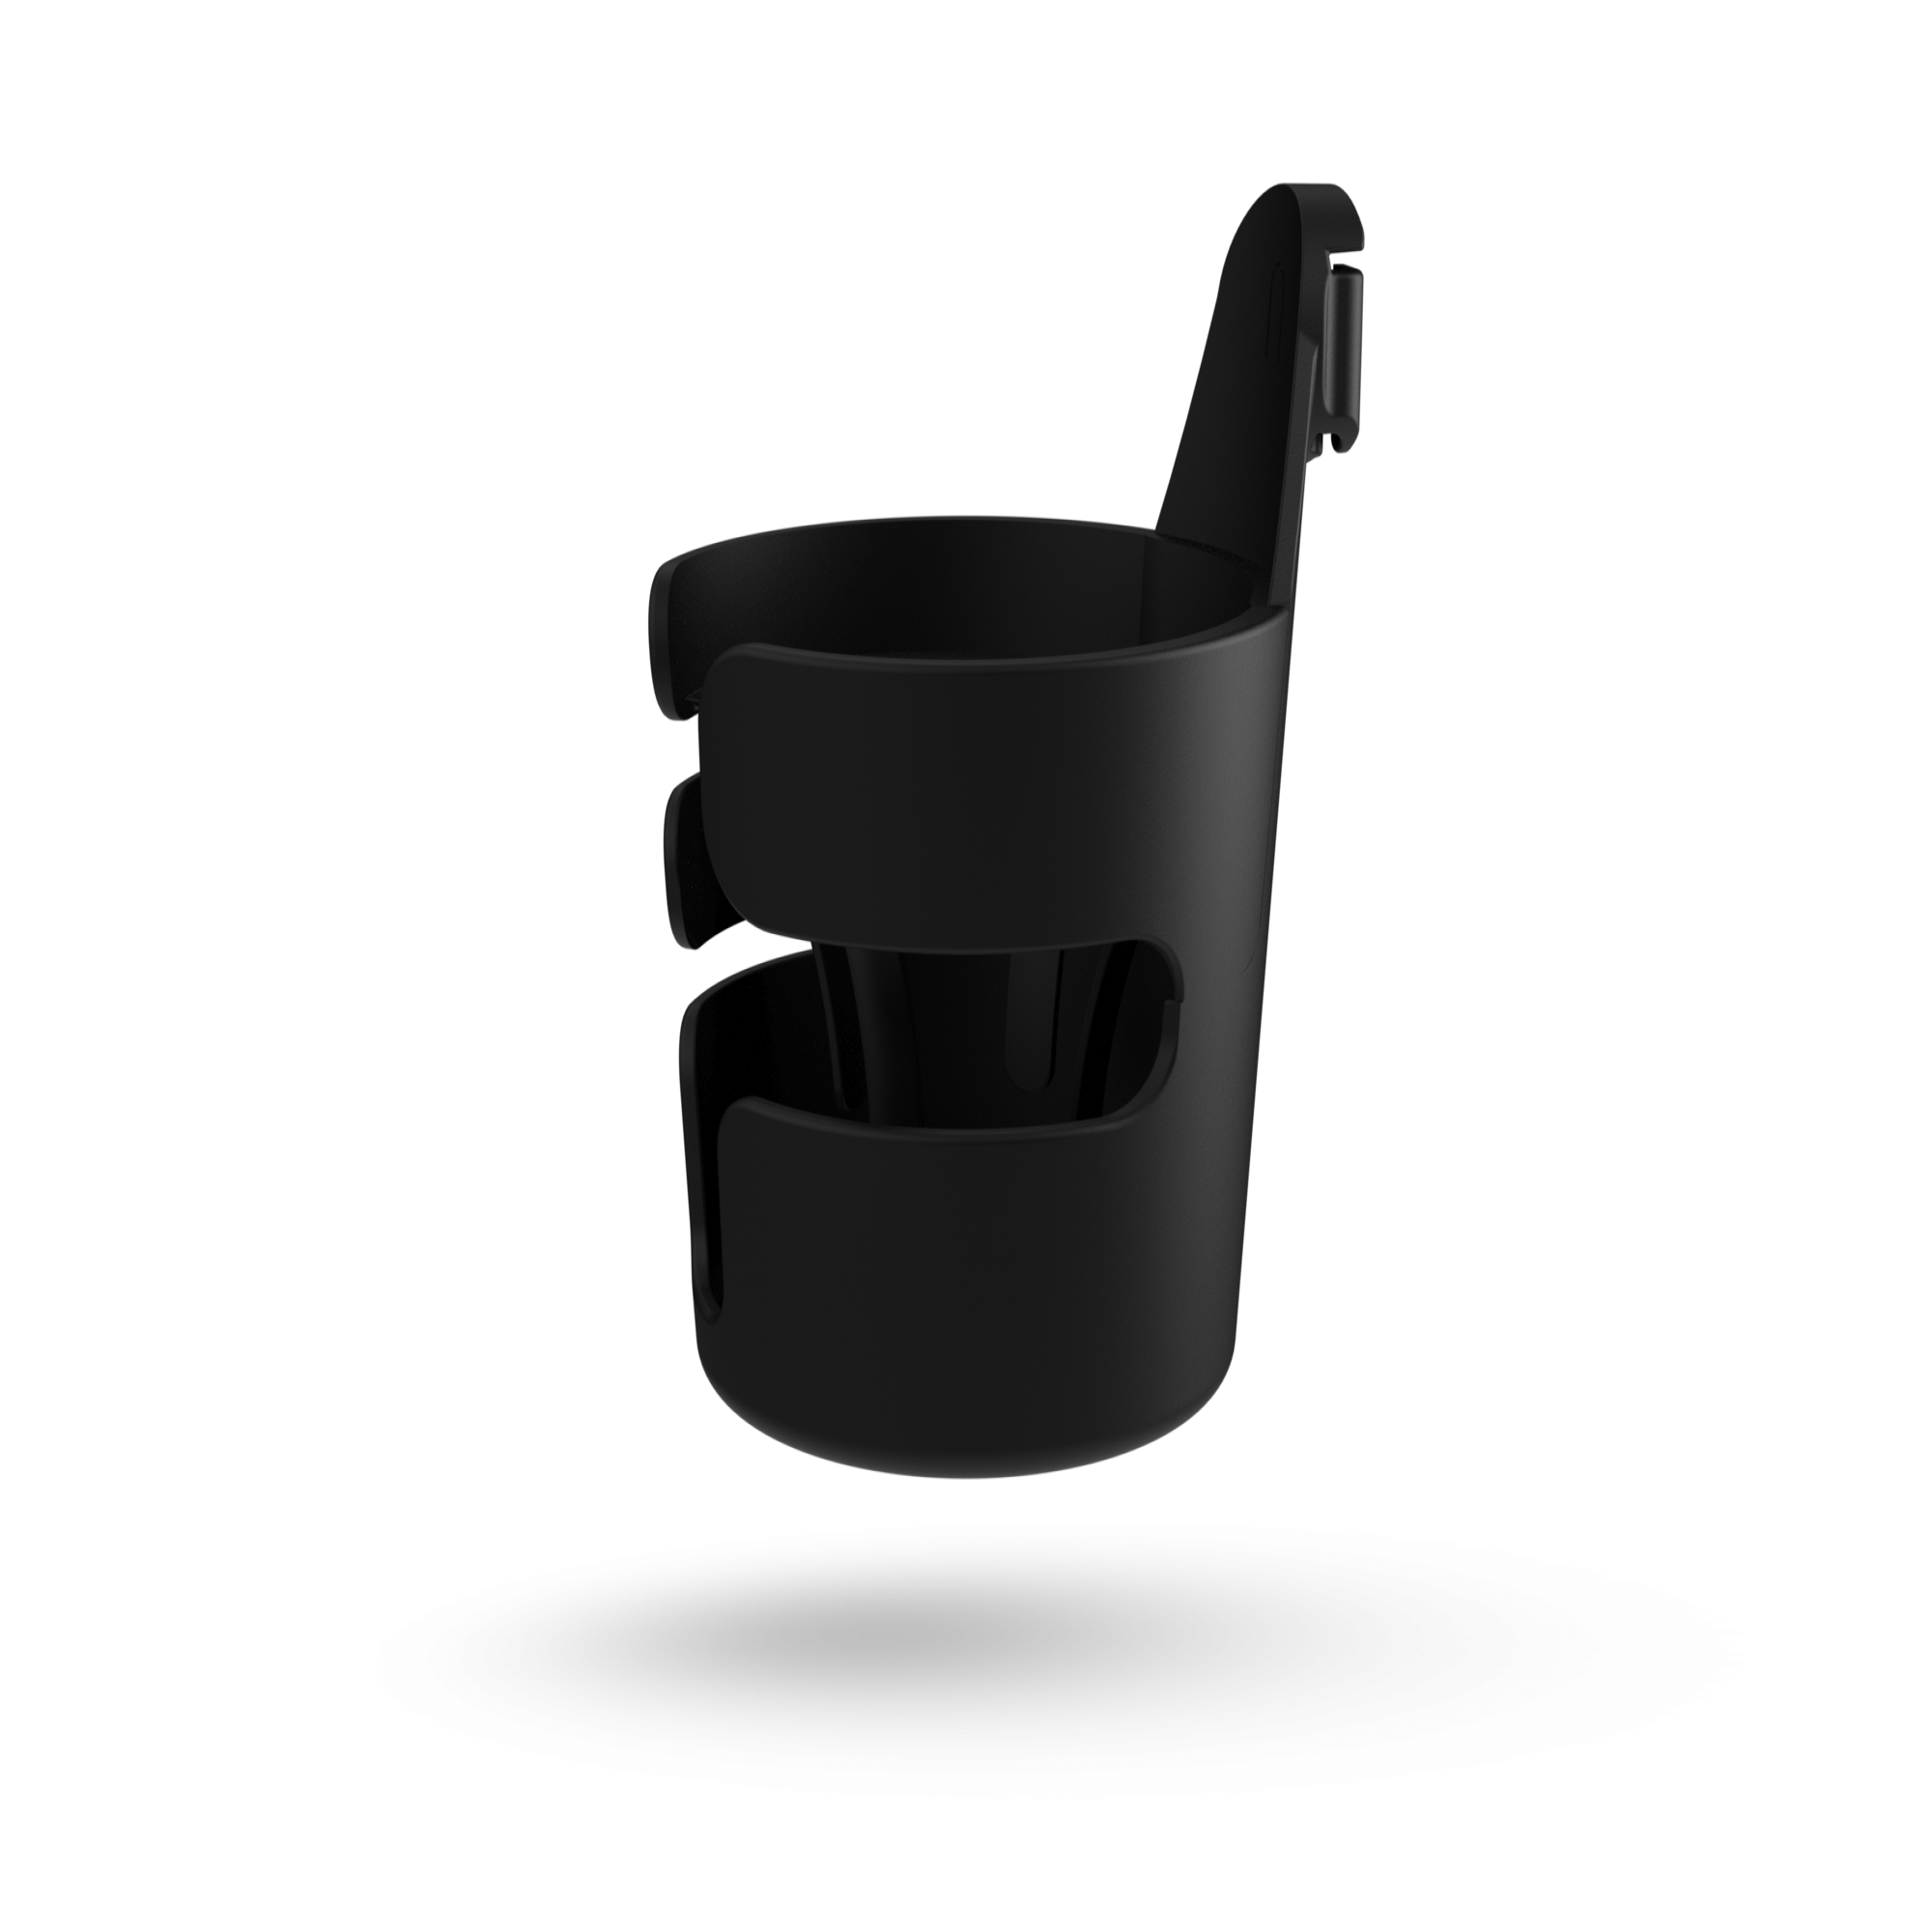 bugaboo cup holder clip